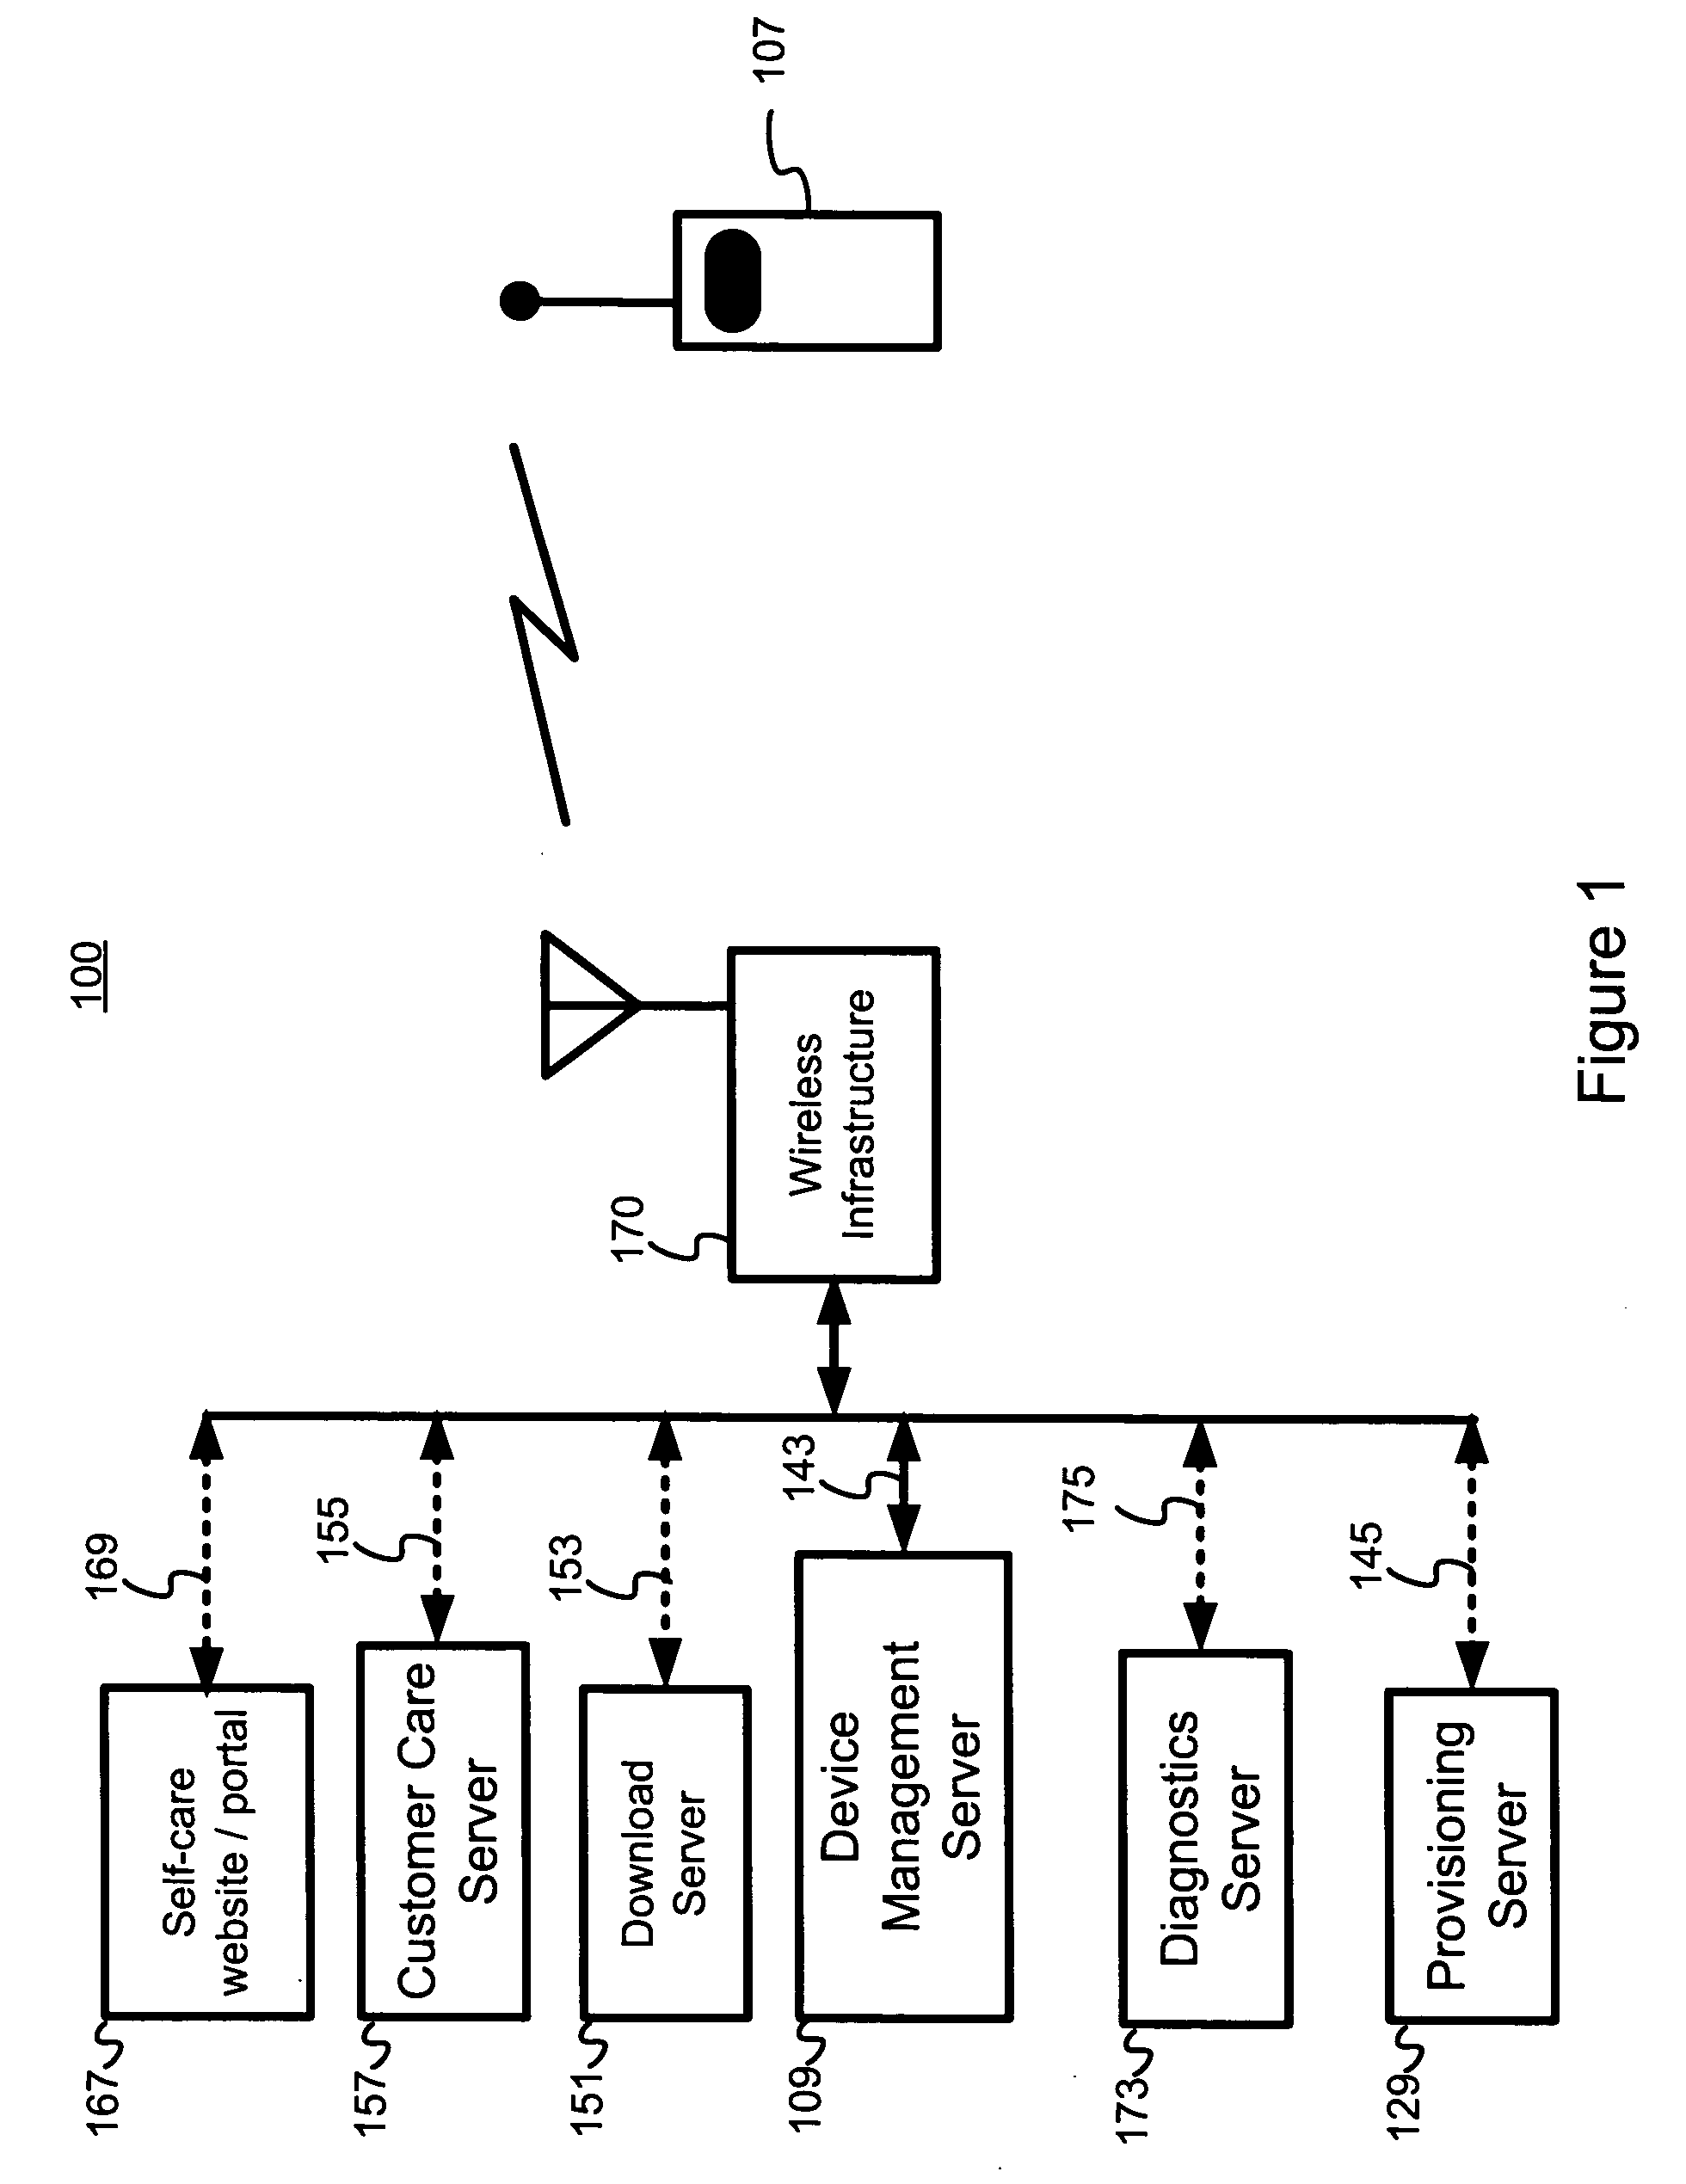 Device profile retrieval in a management network